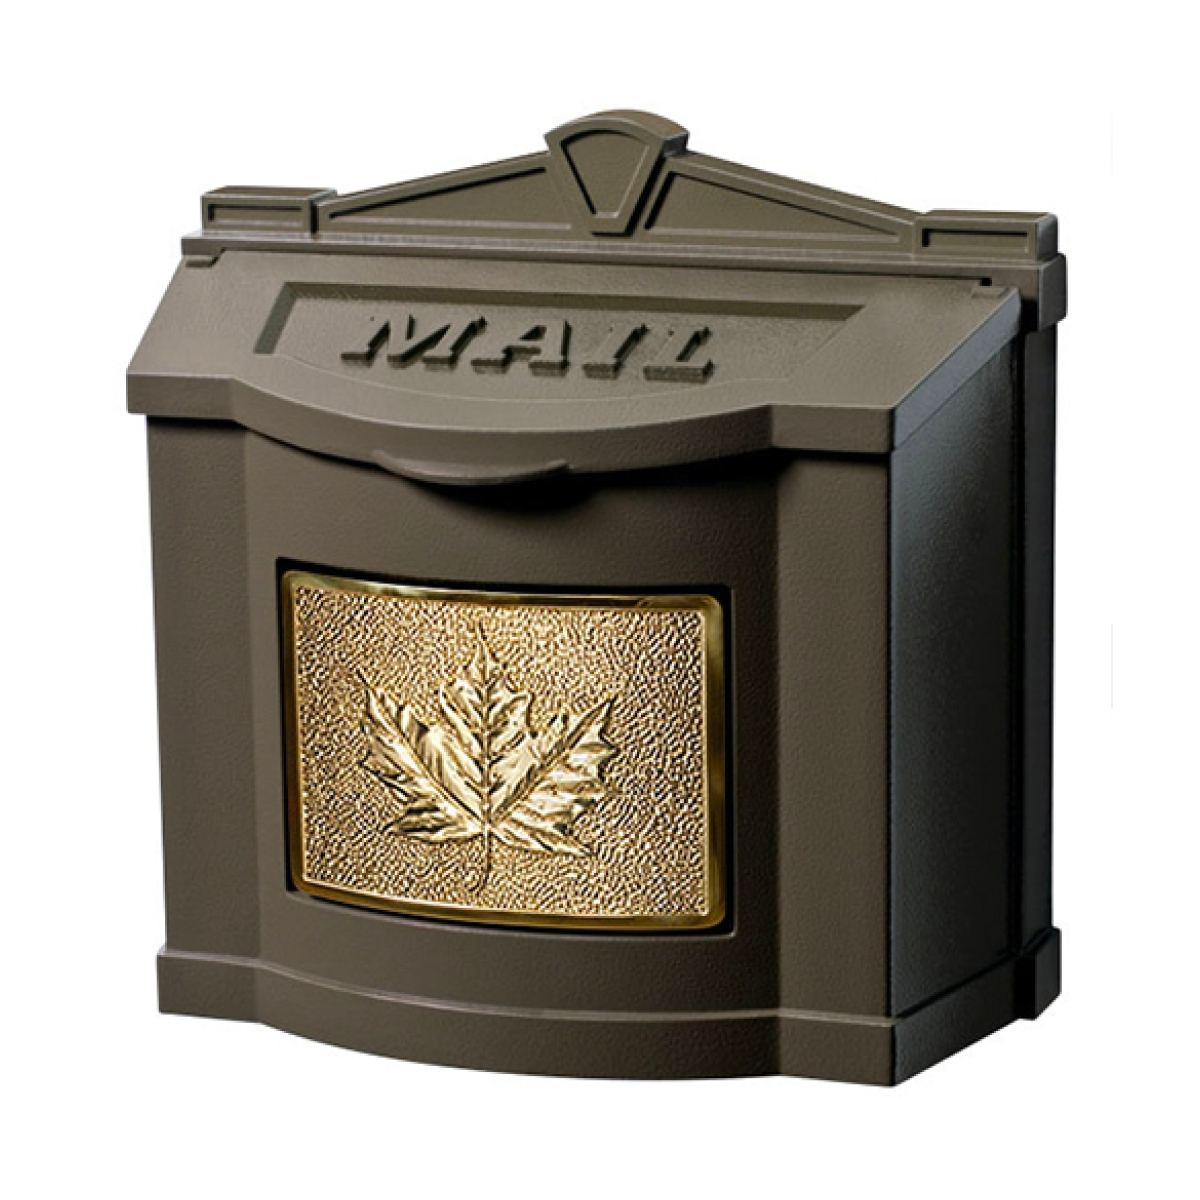 Gaines Maple Leaf Wall Mount Mailbox Product Image